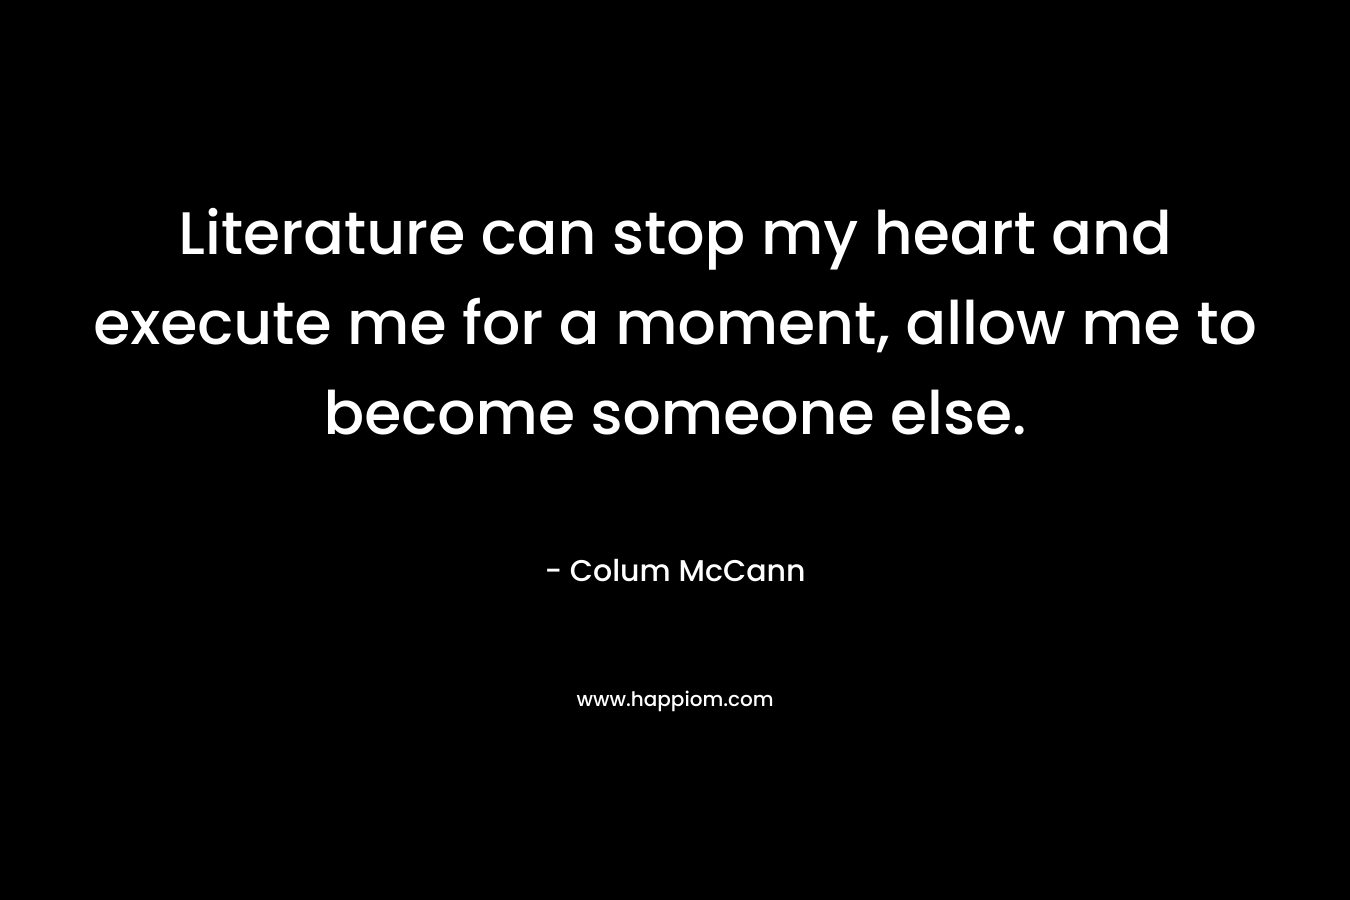 Literature can stop my heart and execute me for a moment, allow me to become someone else. – Colum McCann